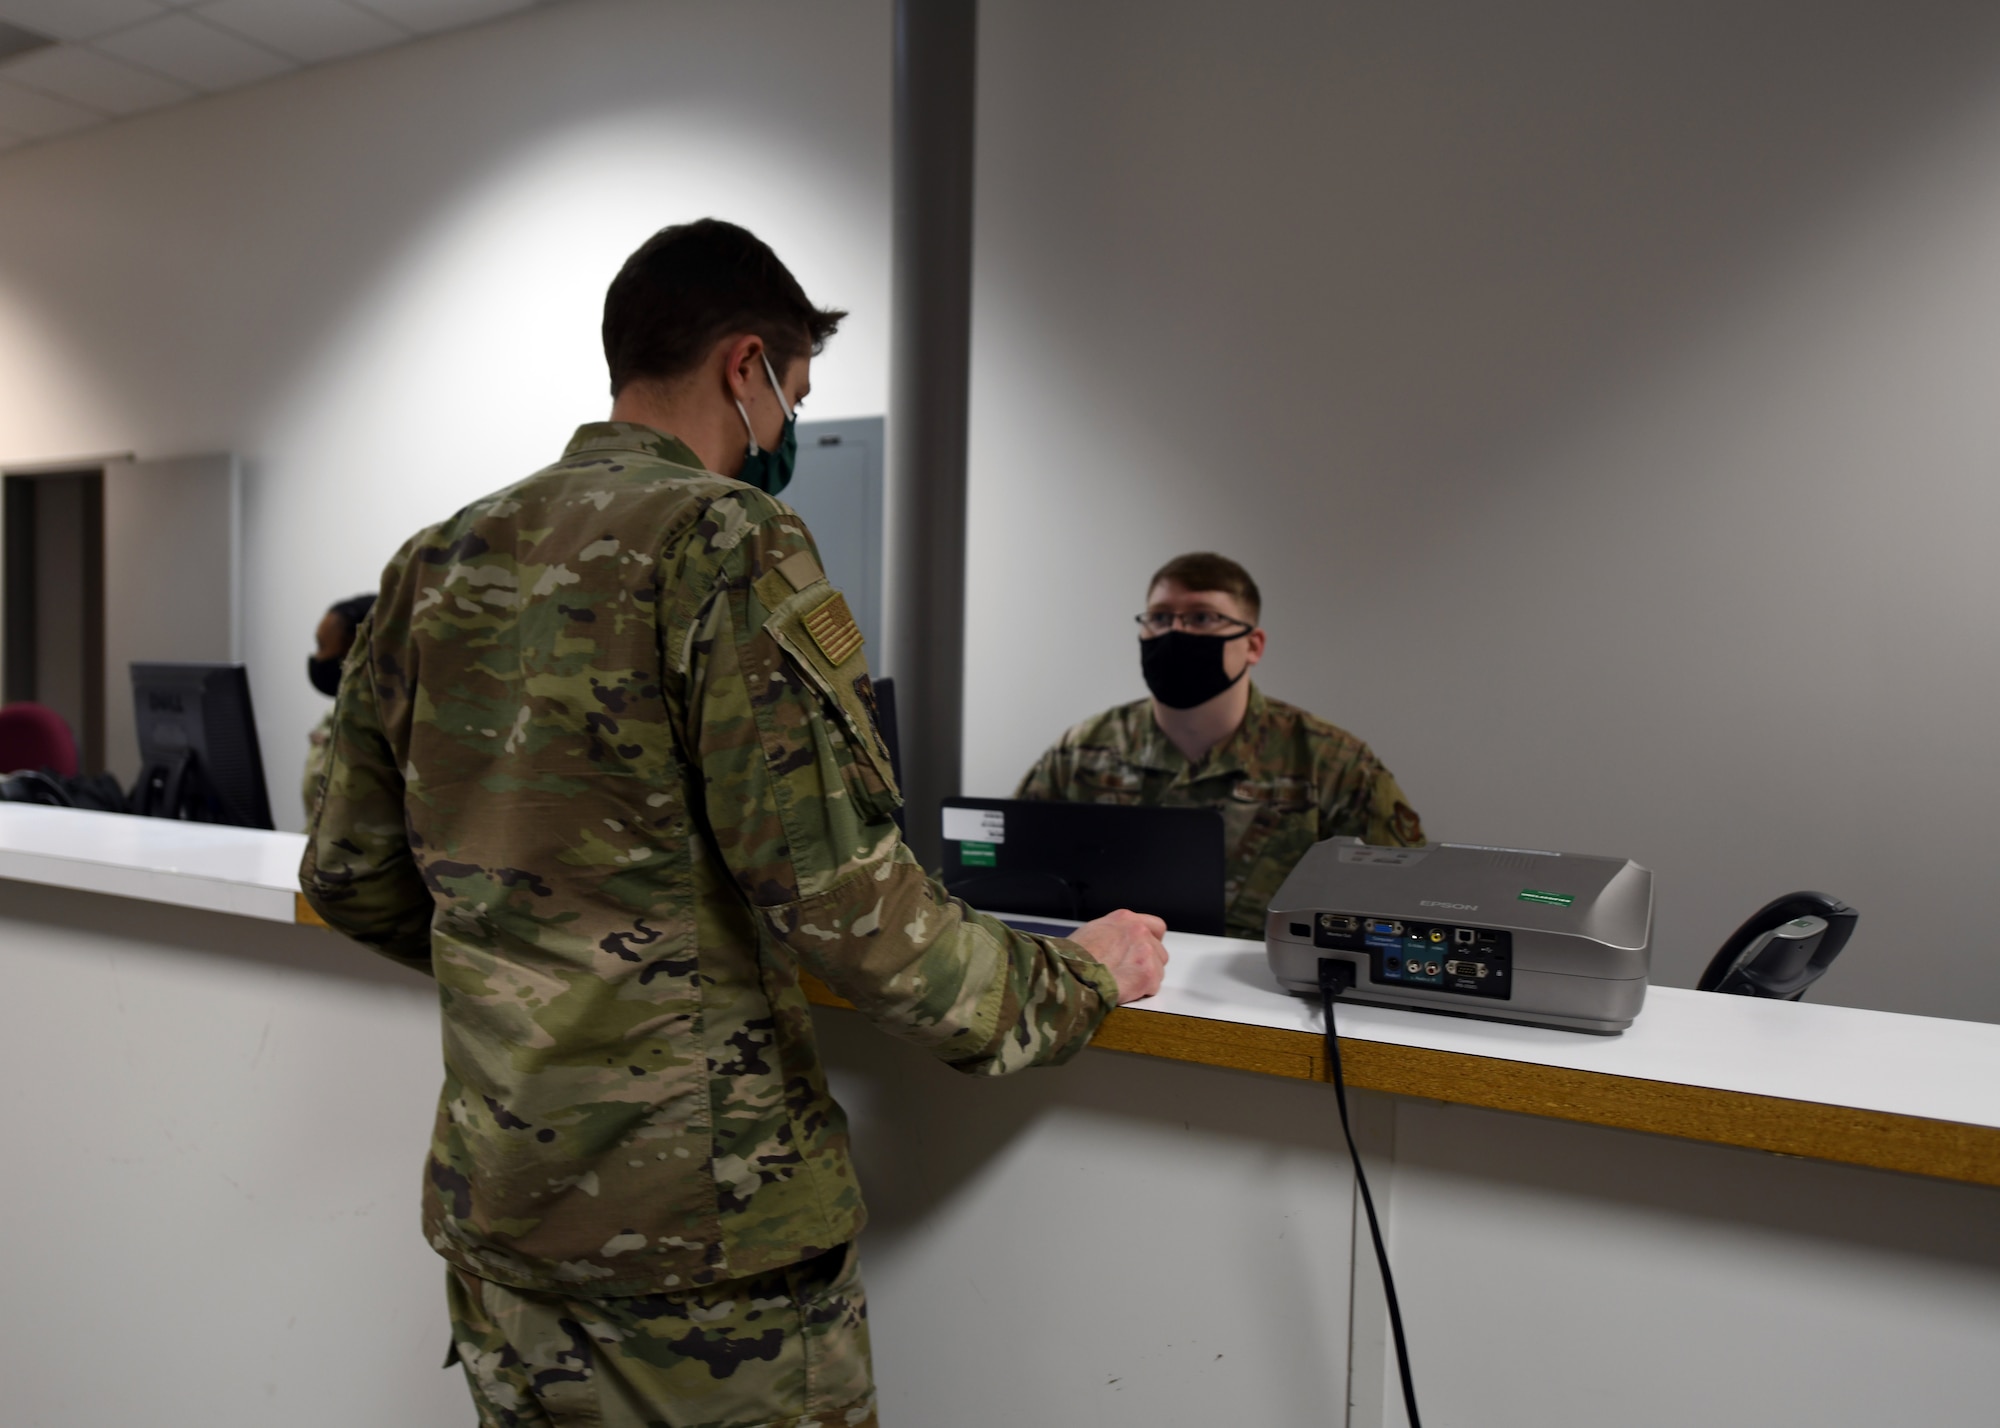 A masked Airman stands at a counter and another masked Airman sits behind it.